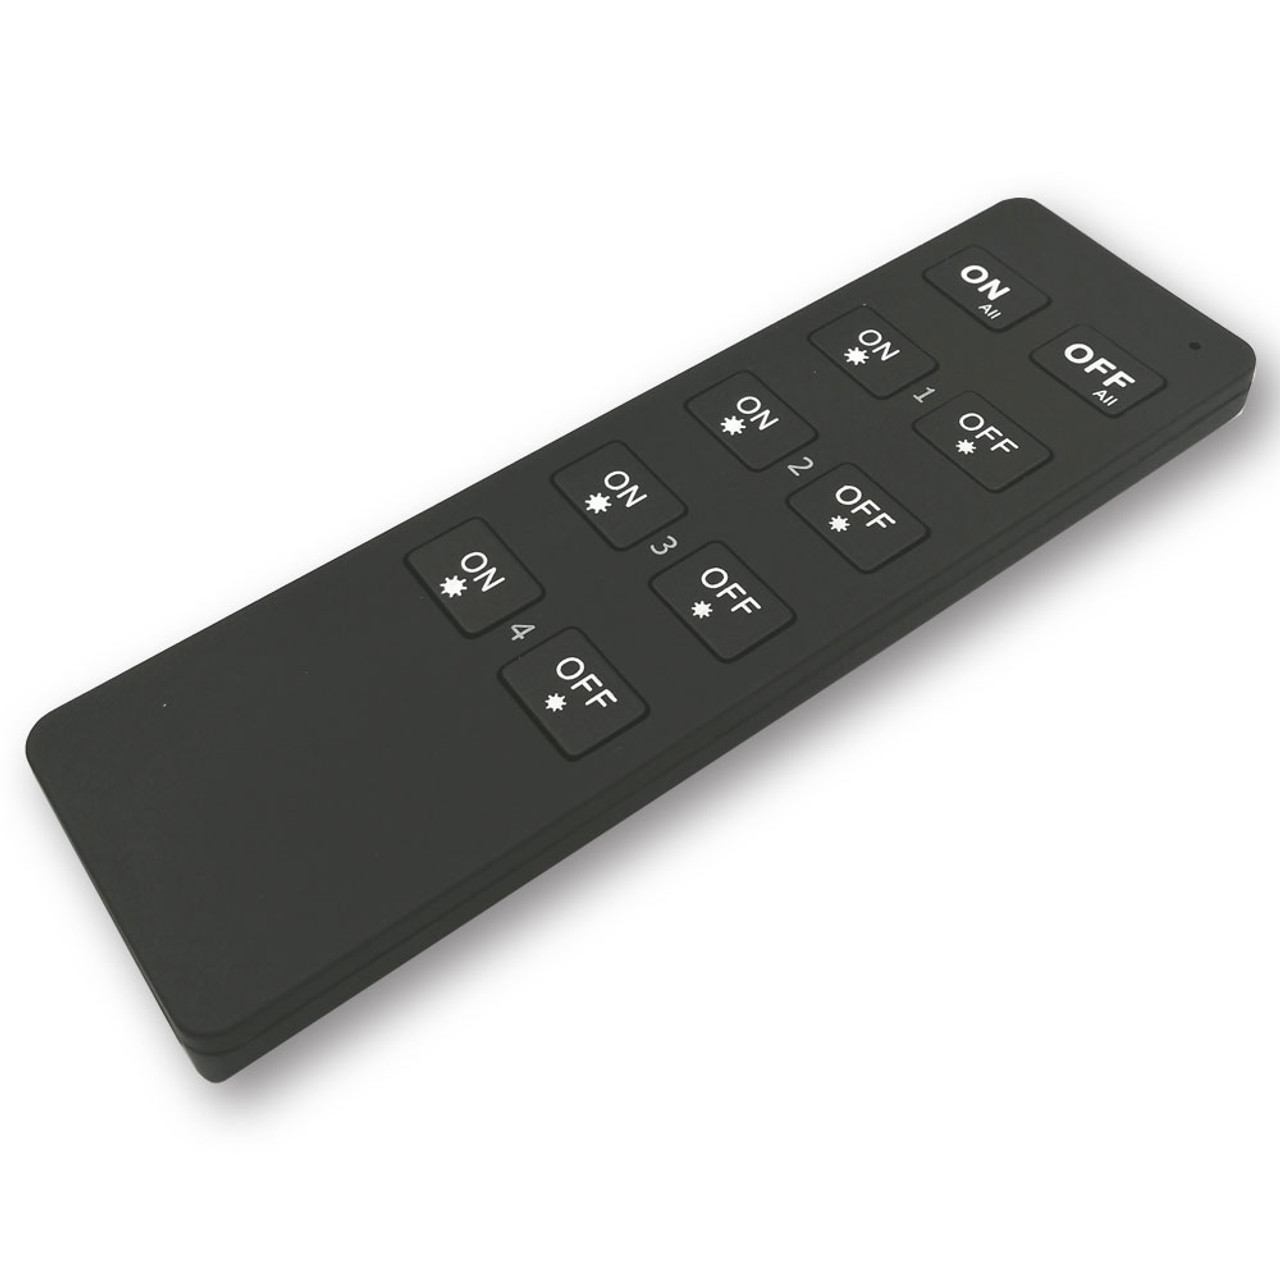 Mega LED - RF Wireless Controller - Remote Control For up to 4 Zones For 32510, 32516 Dimmers (32512) - Apollo Lighting